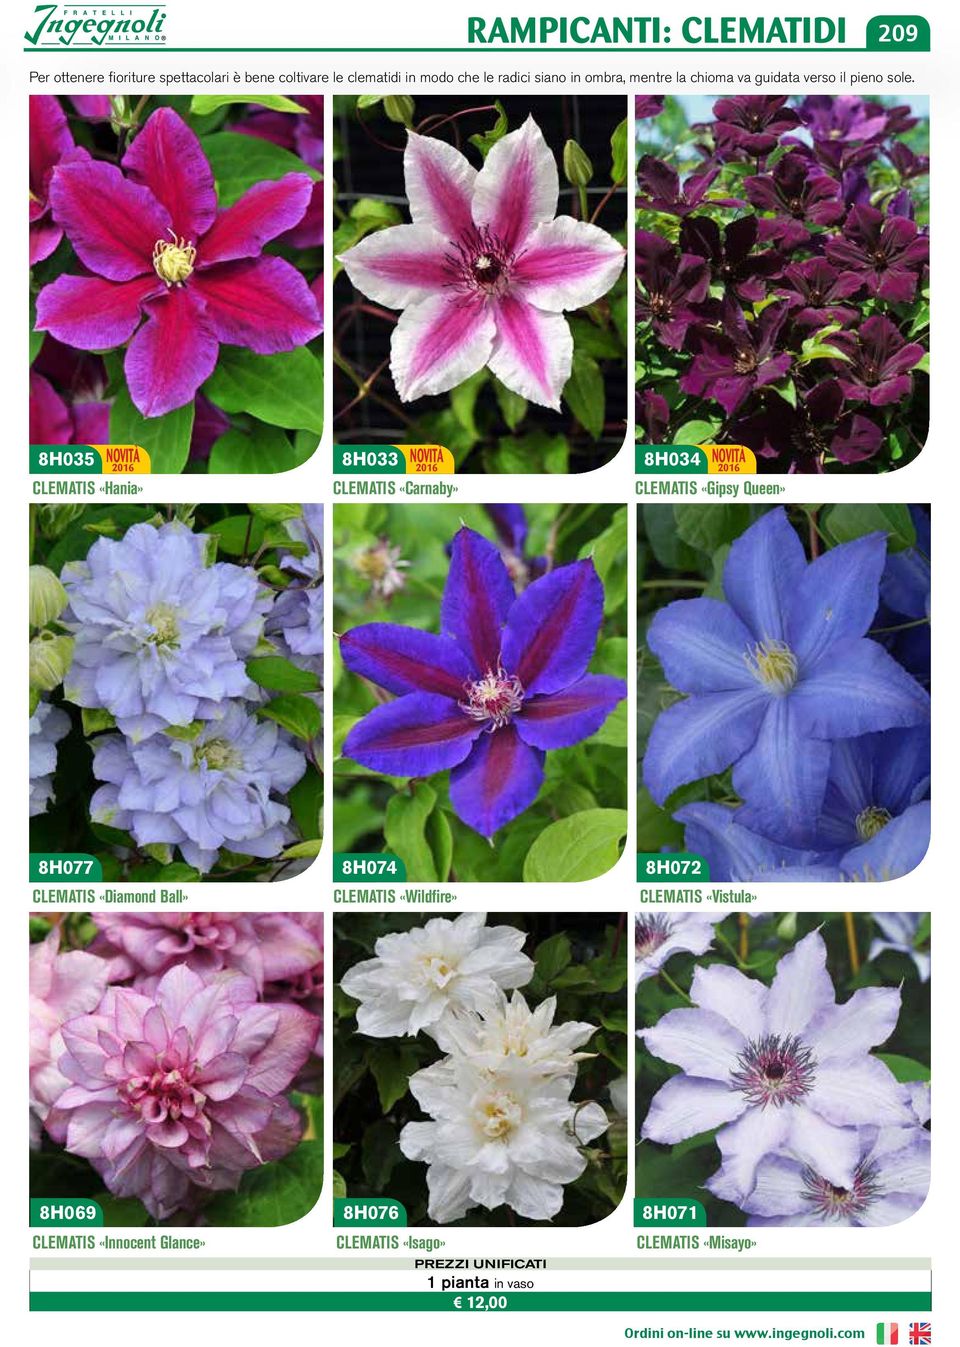 8H035 8H033 8H034 CLEMATIS «Hania» CLEMATIS «Carnaby» CLEMATIS «Gipsy Queen» 8H077 CLEMATIS «Diamond Ball» 8H074